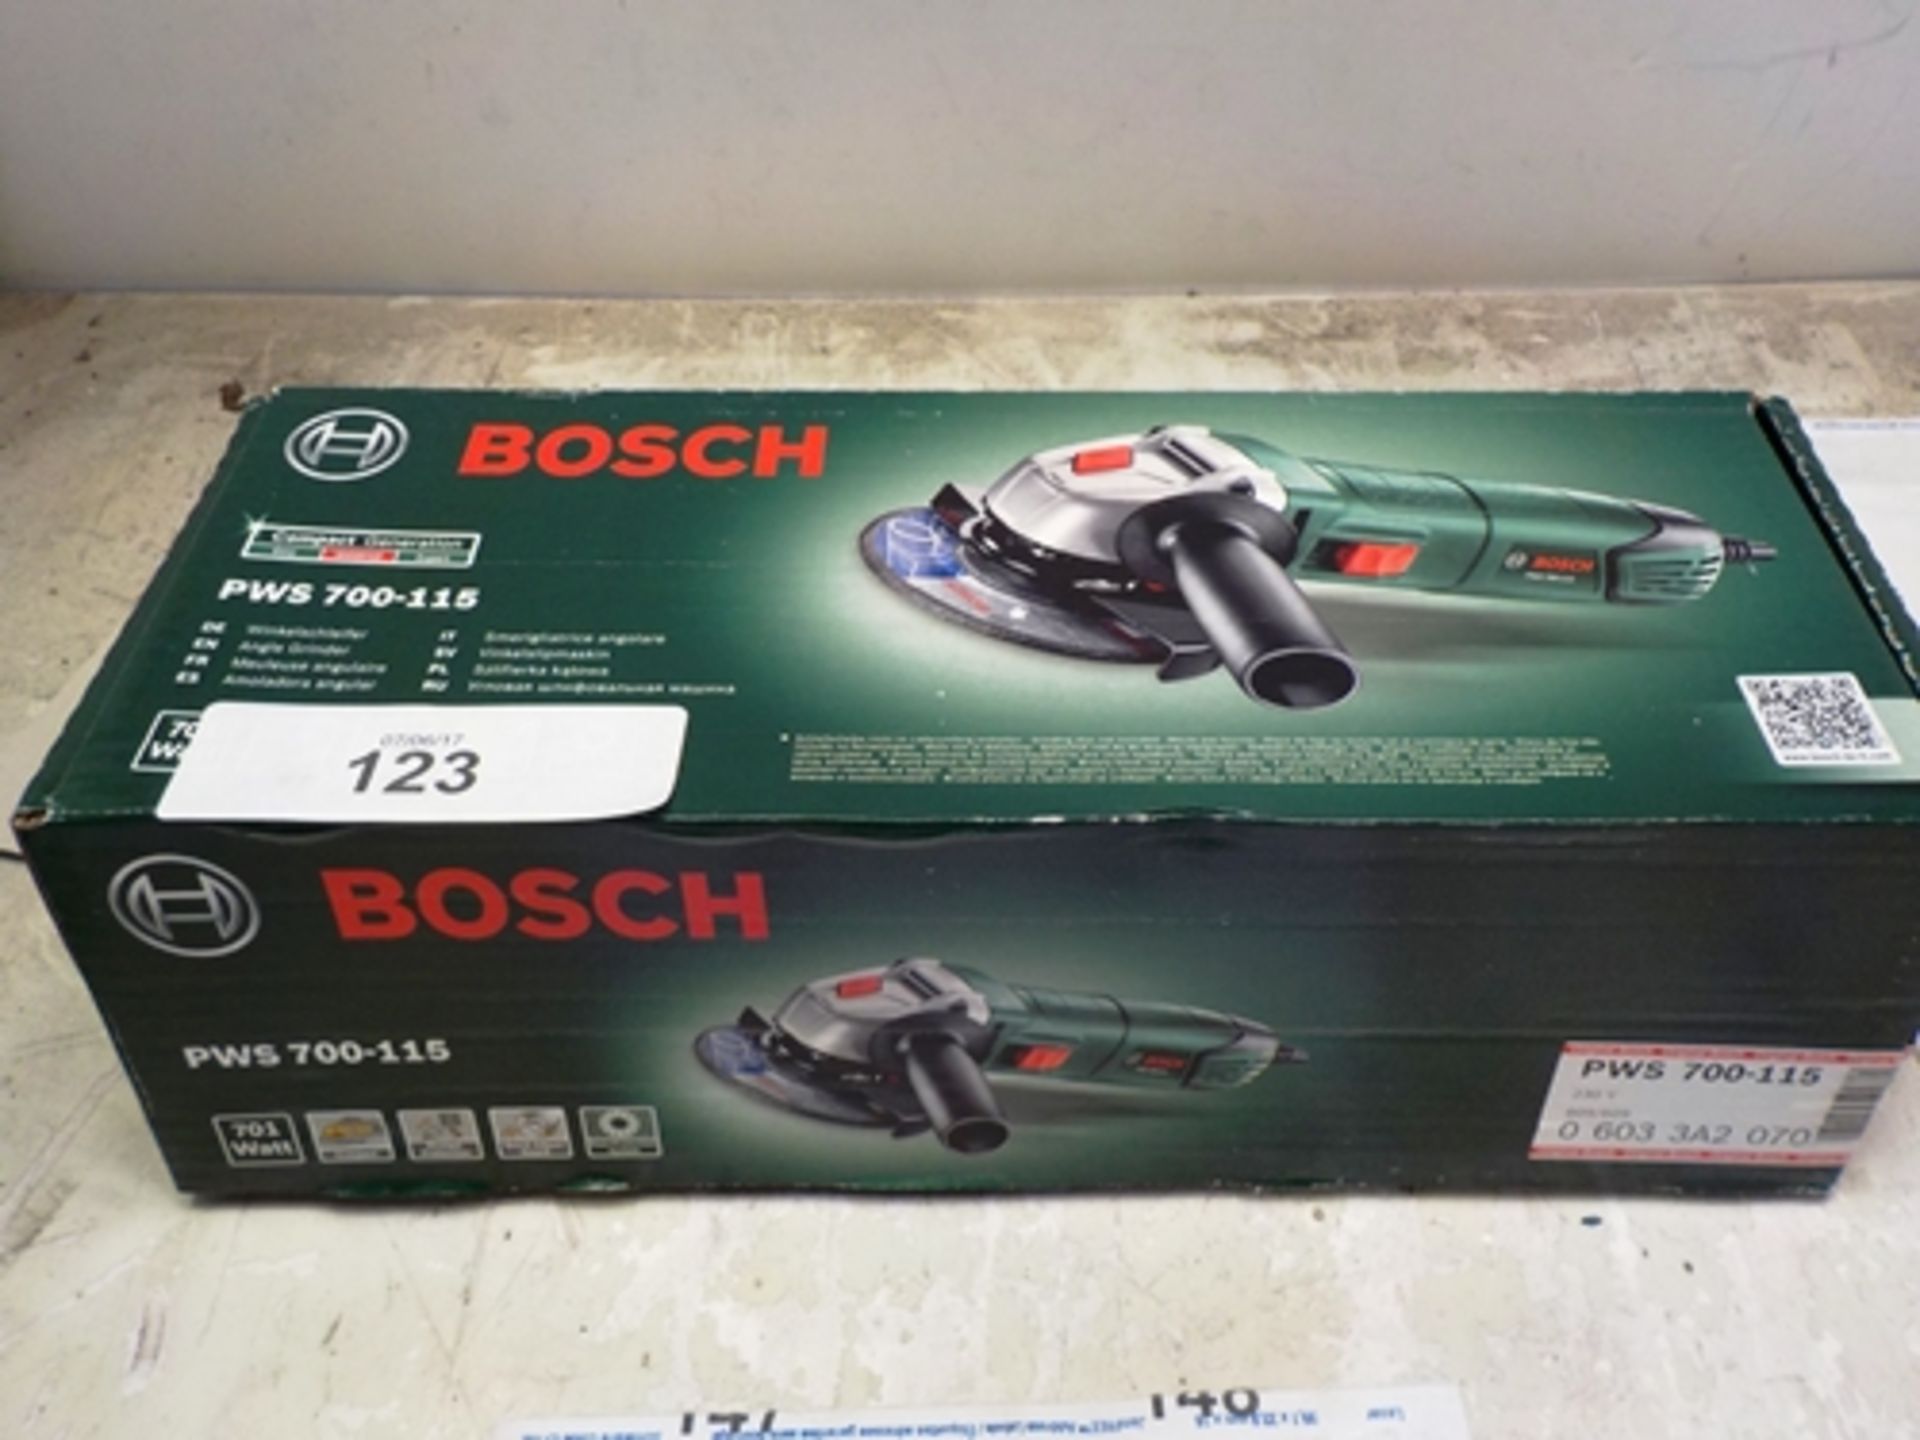 Bosch PW5 700-115 angle grinder, 230v, code 0603 3A2 070 - New in box (TC4)